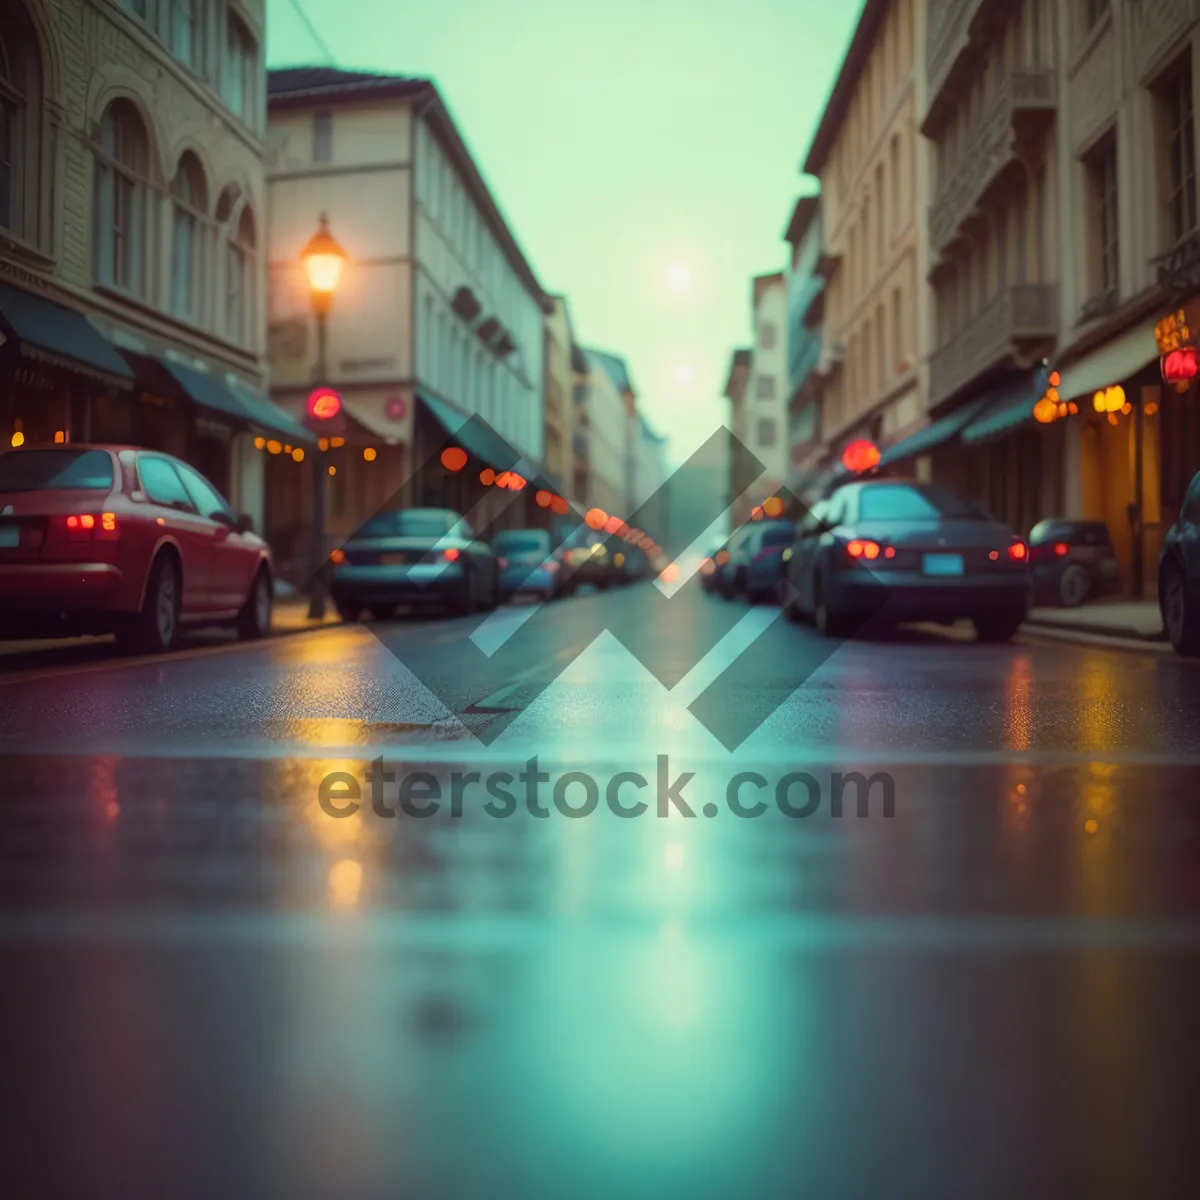 Picture of Nighttime Cityscape with Speeding Car